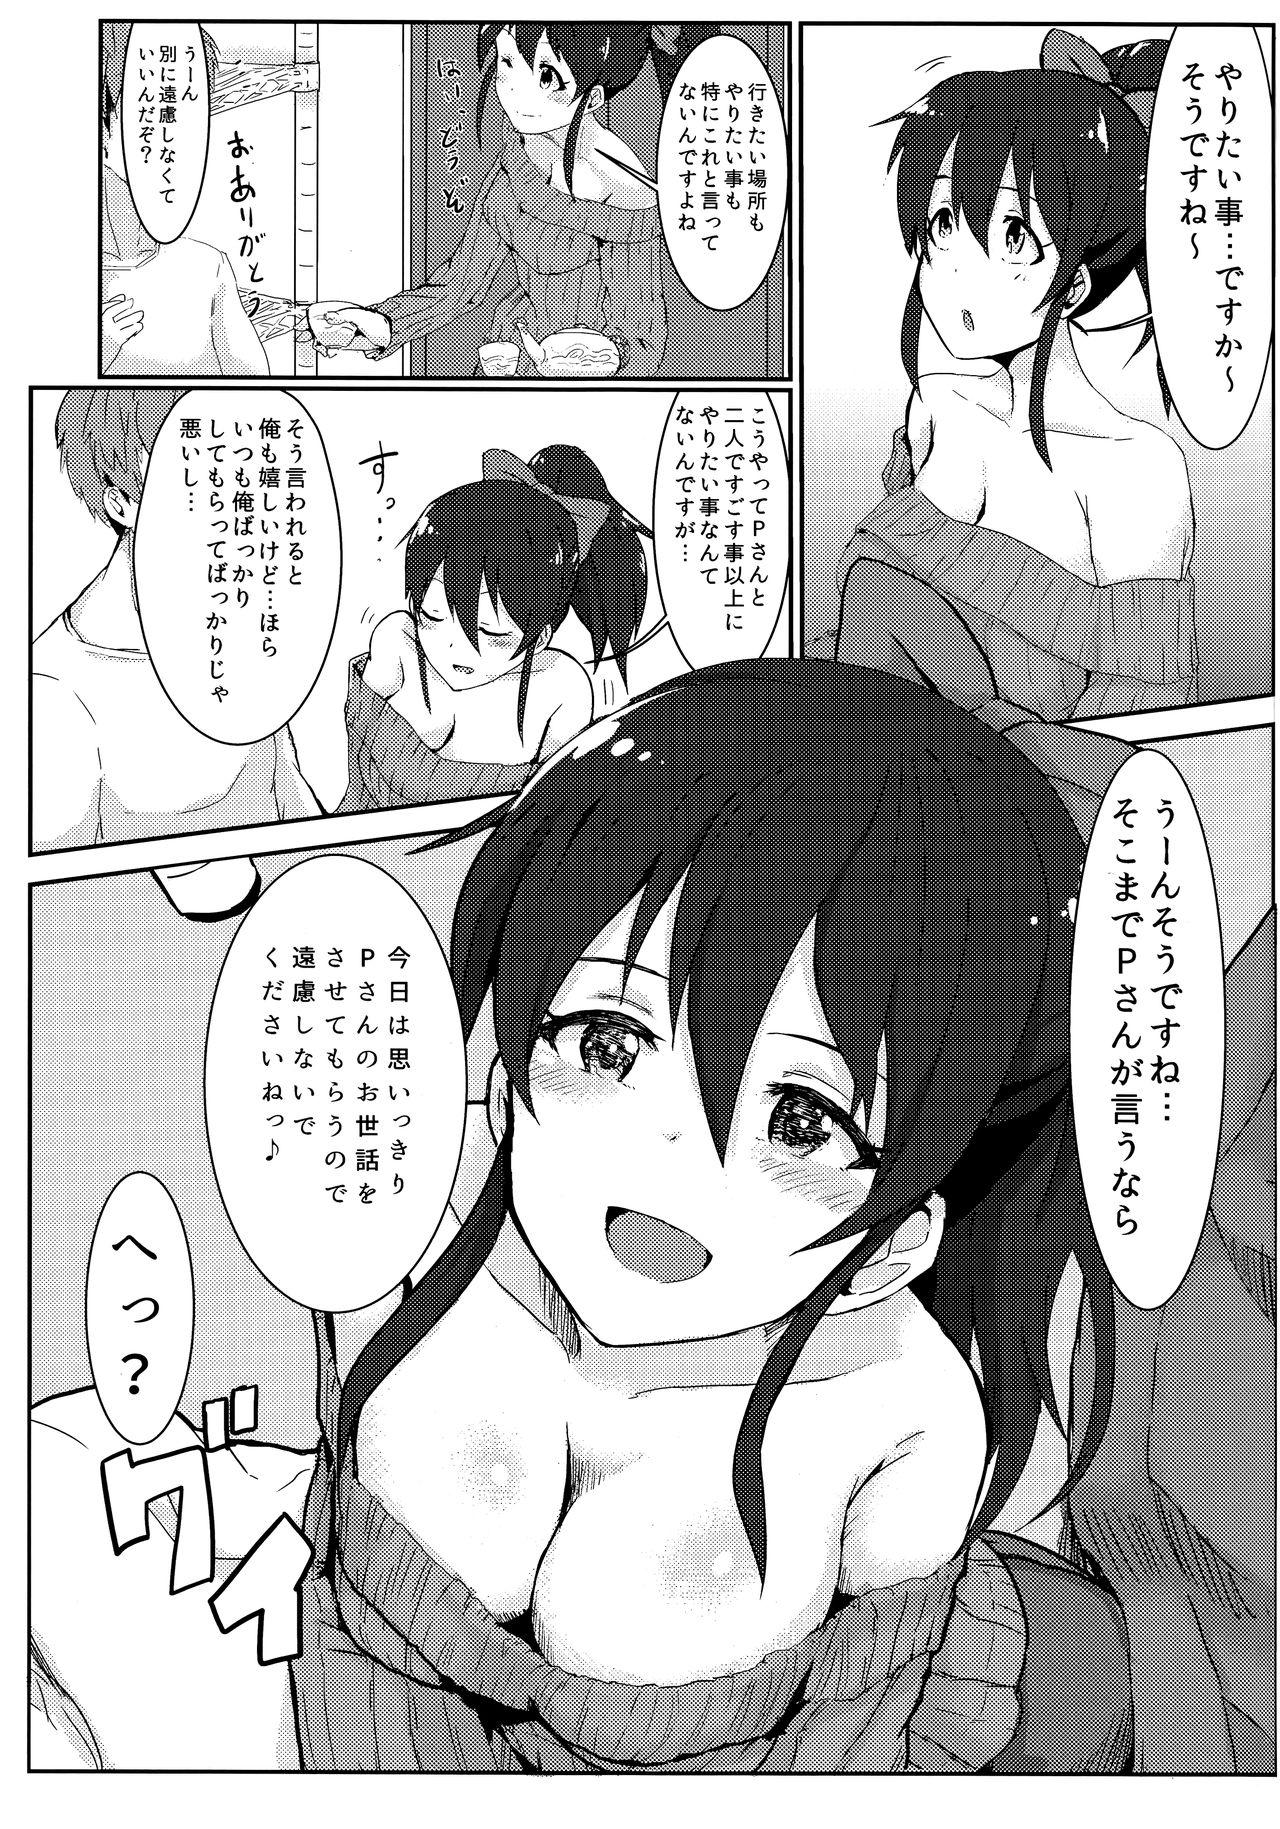 Rough Sex Zutto Issho ga Ii na - The idolmaster Onlyfans - Page 6